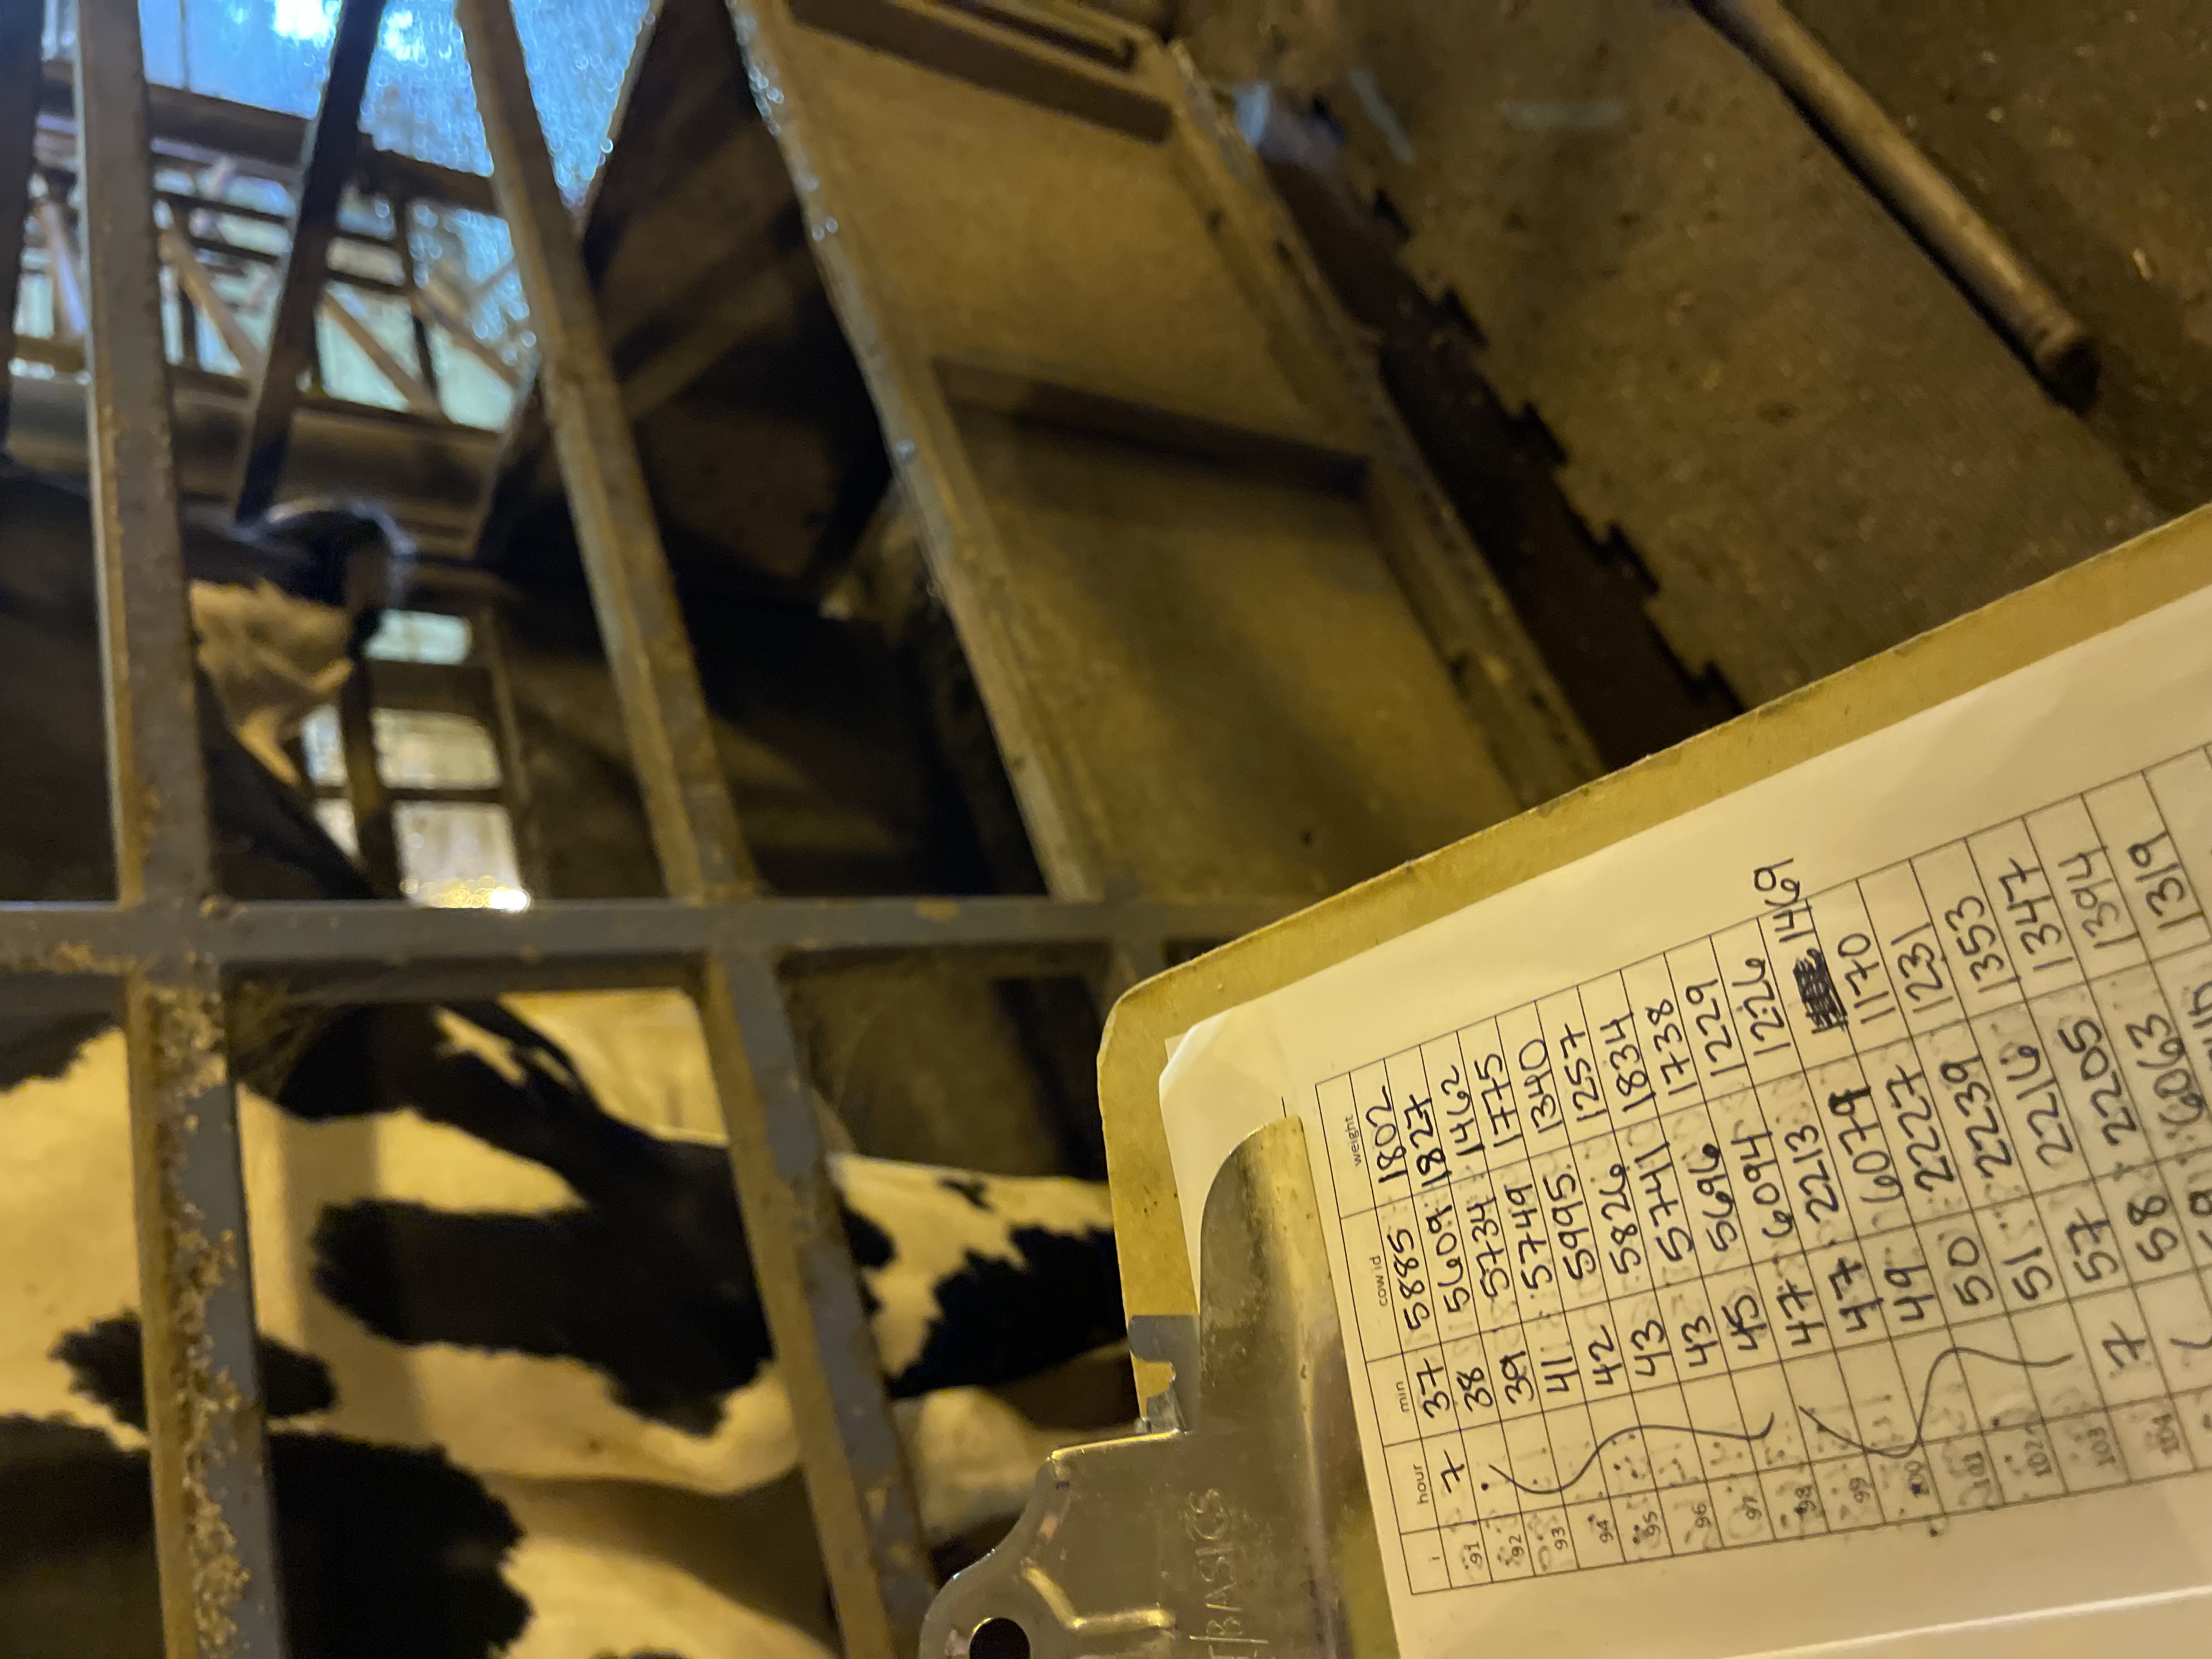 Weighing cows in the chute